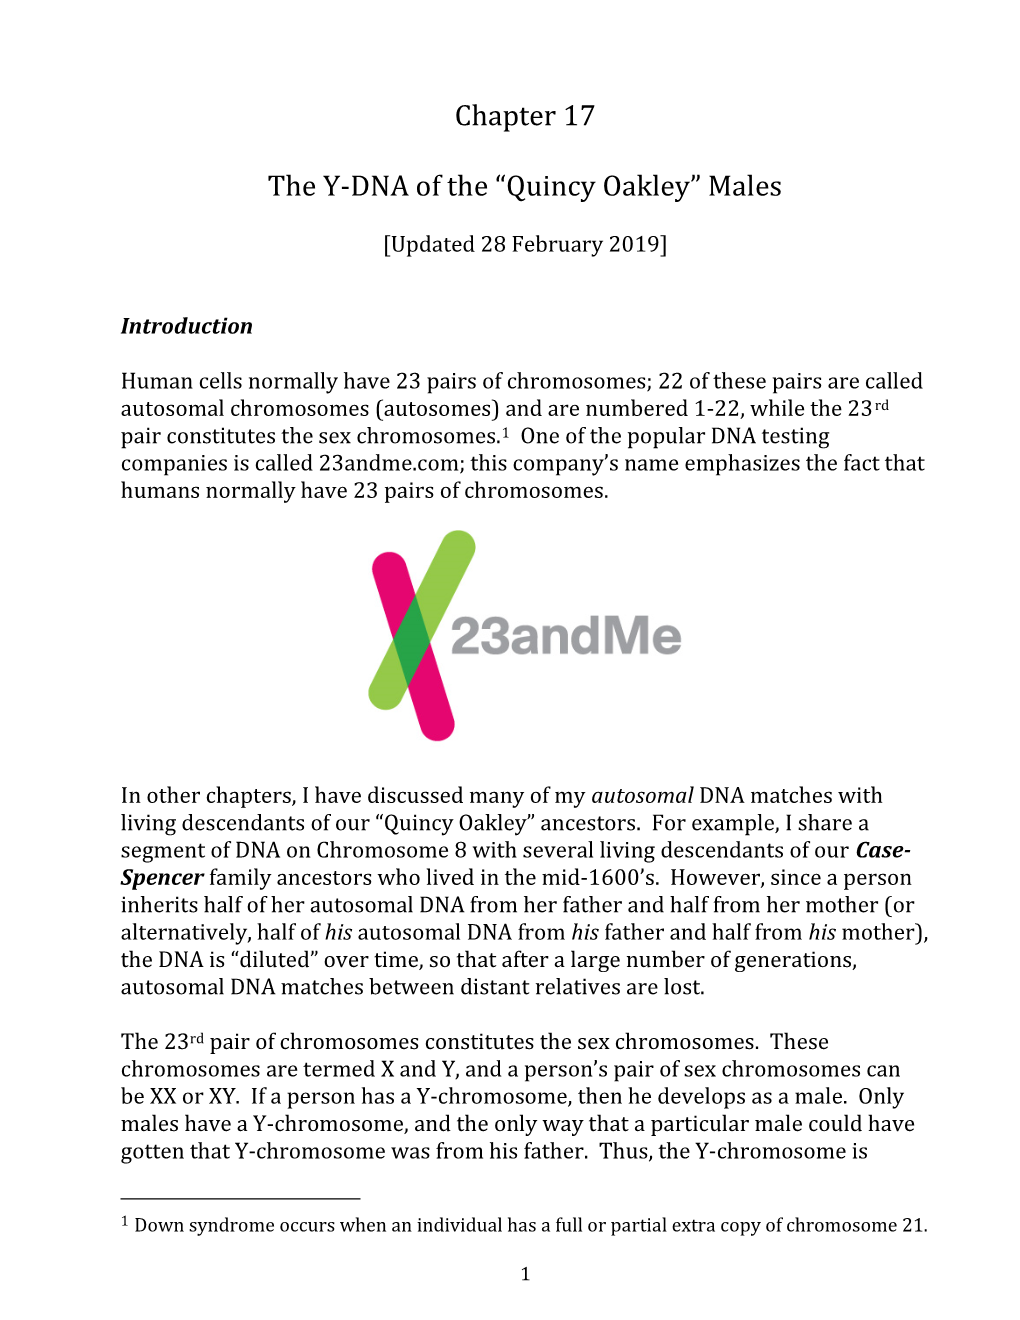 The Y-DNA of the “Quincy Oakley” Males